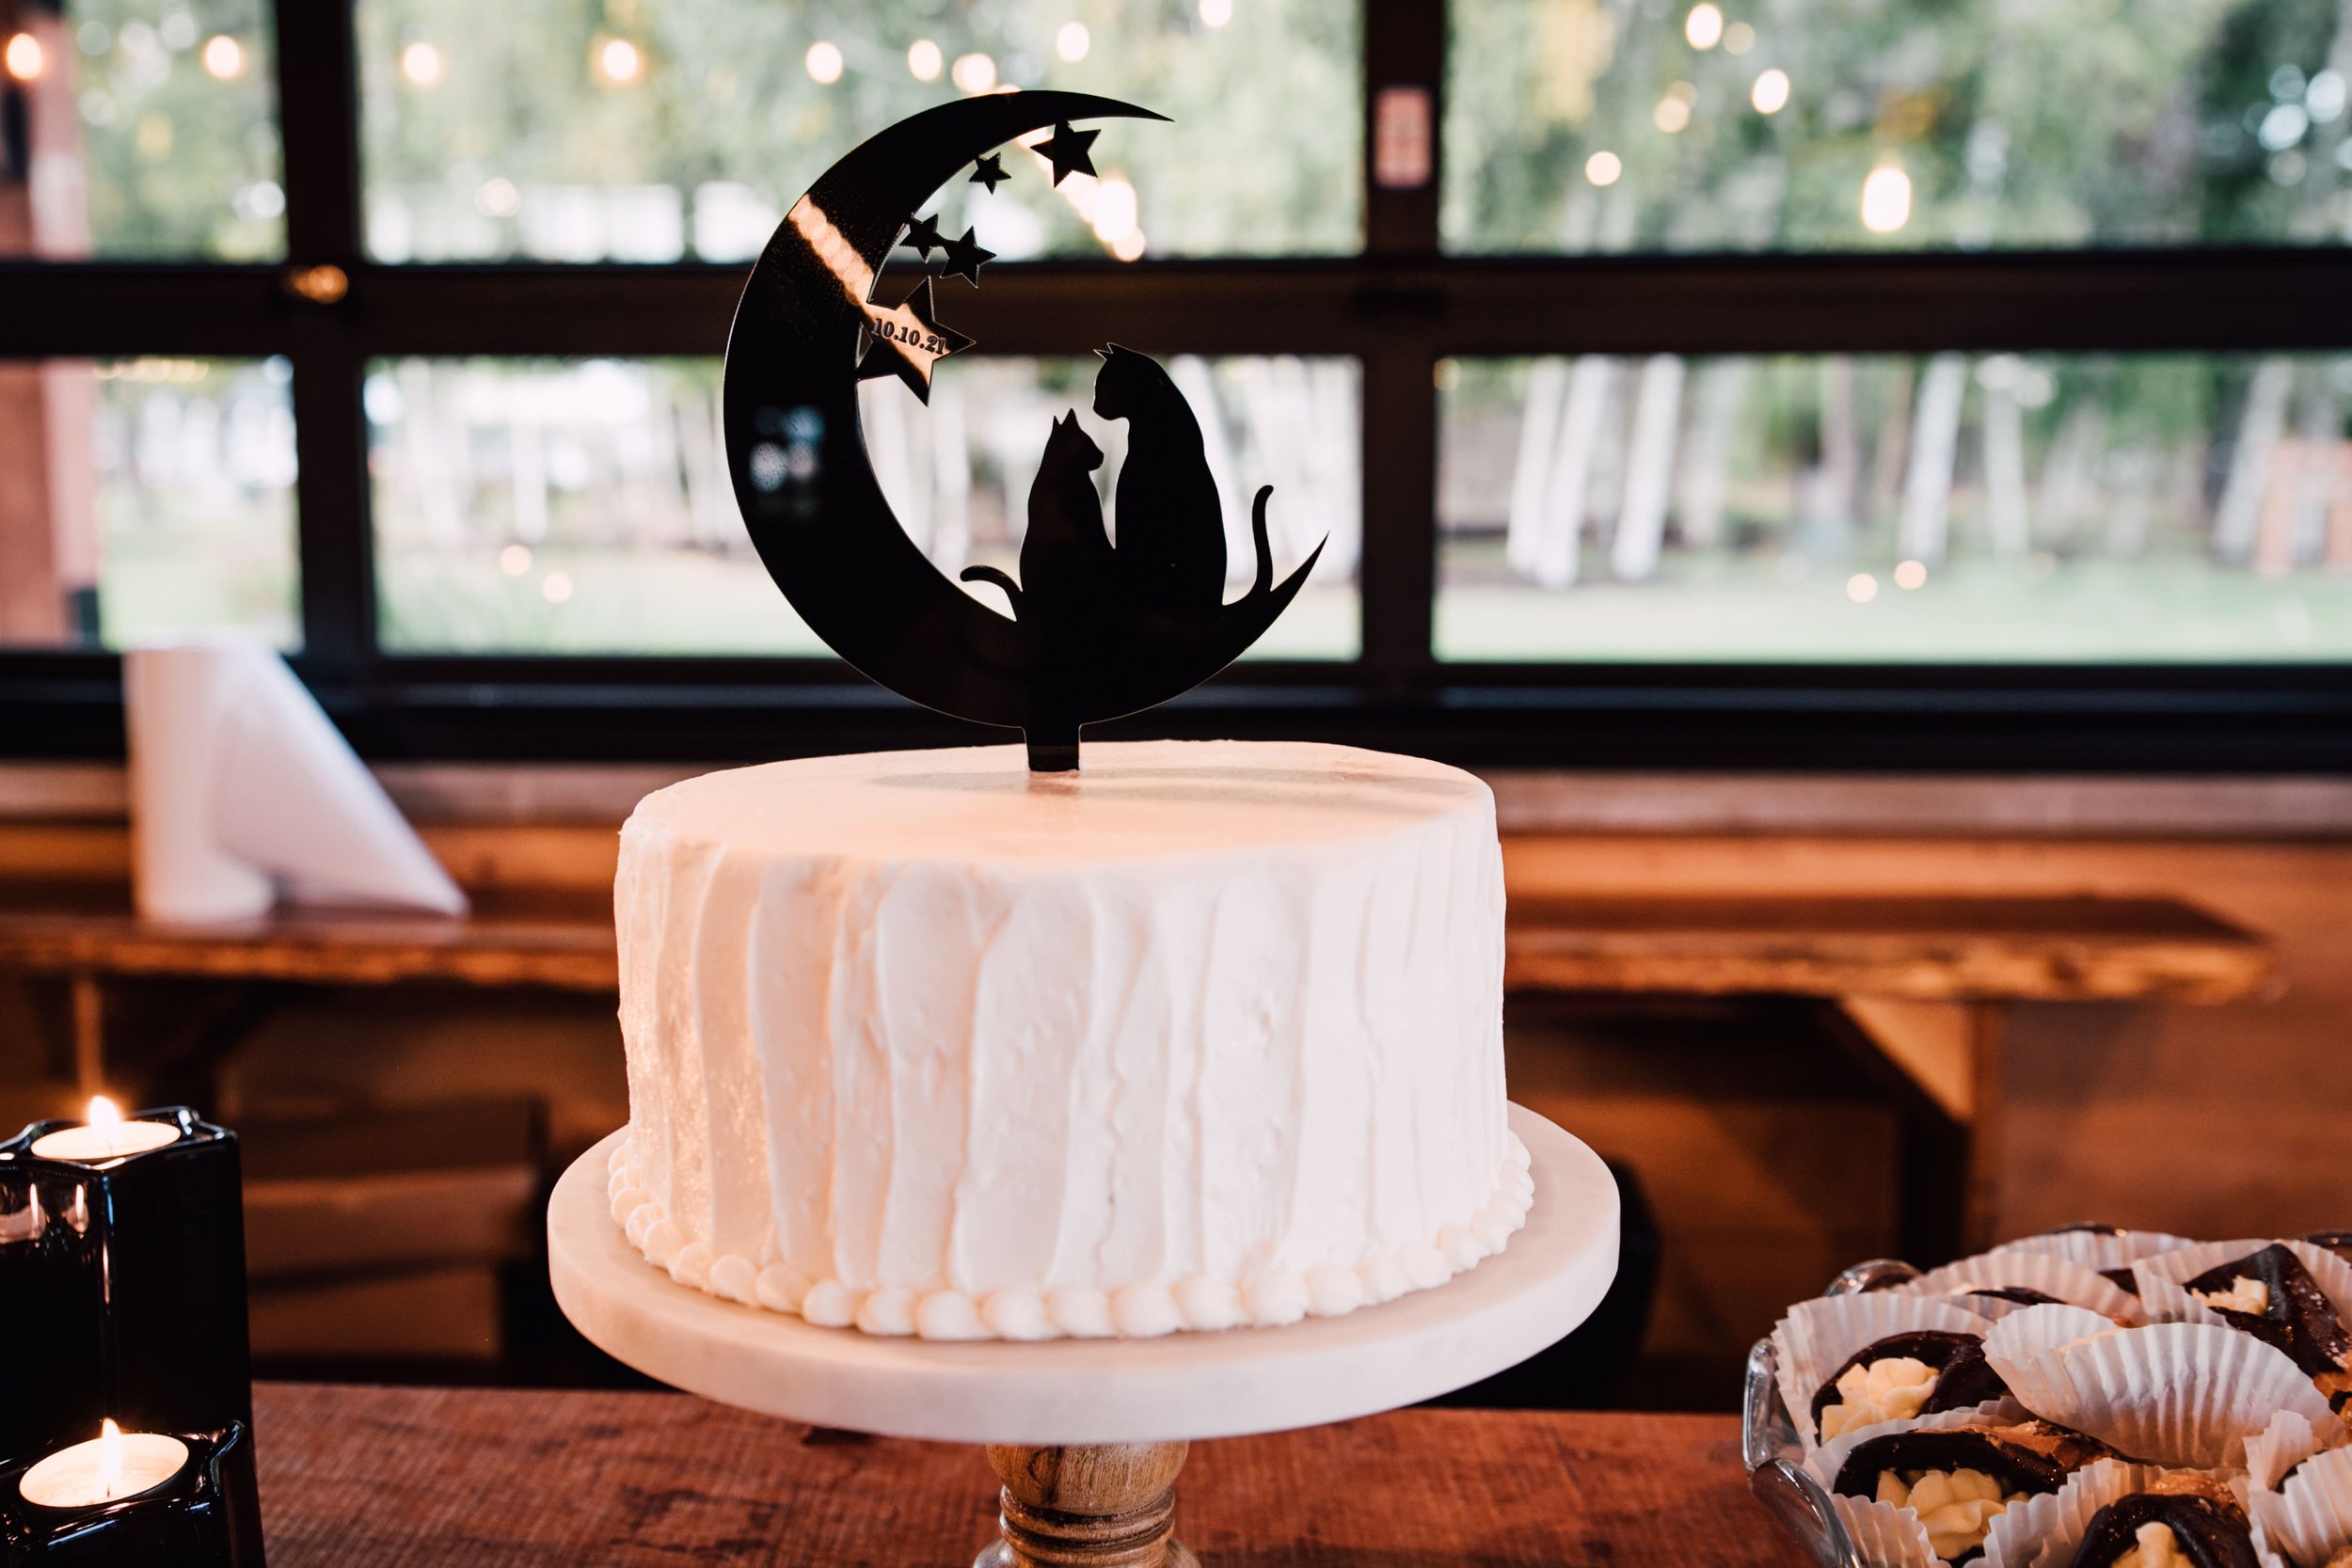  space wedding cake with moon cake topper with an outline of the bride and groom’s cats  